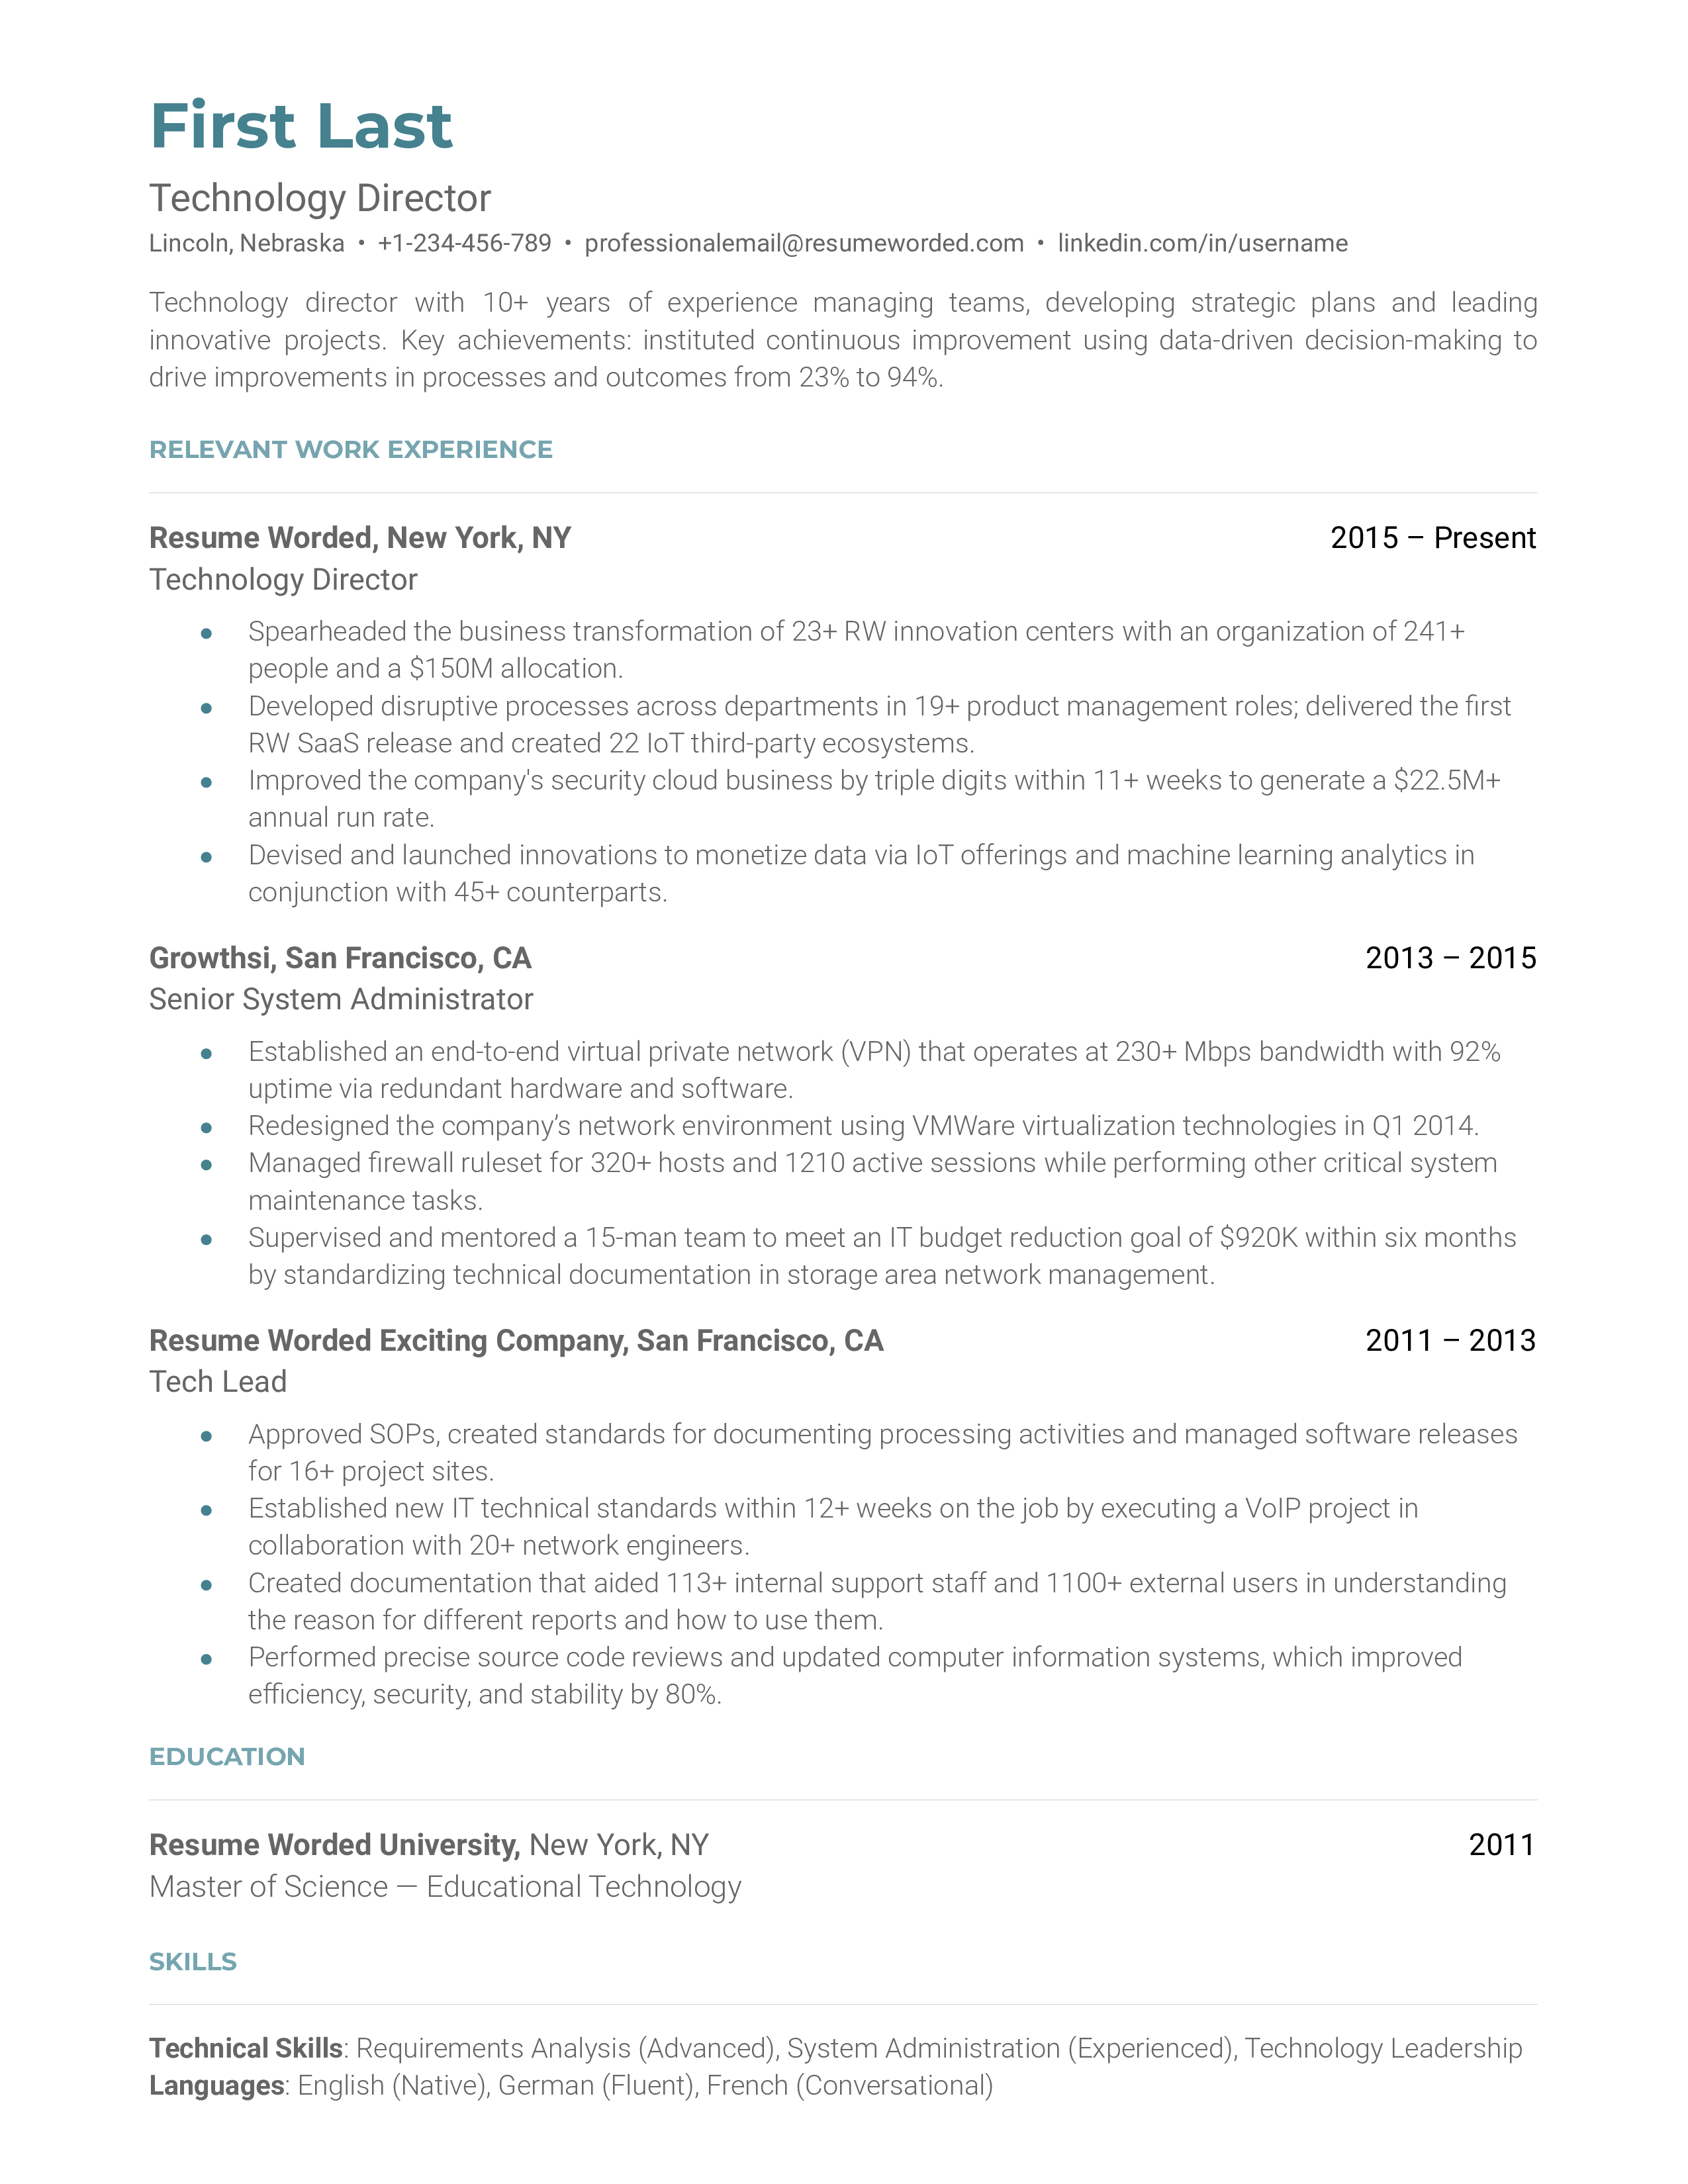 A technology director resume template that leverages strong metrics